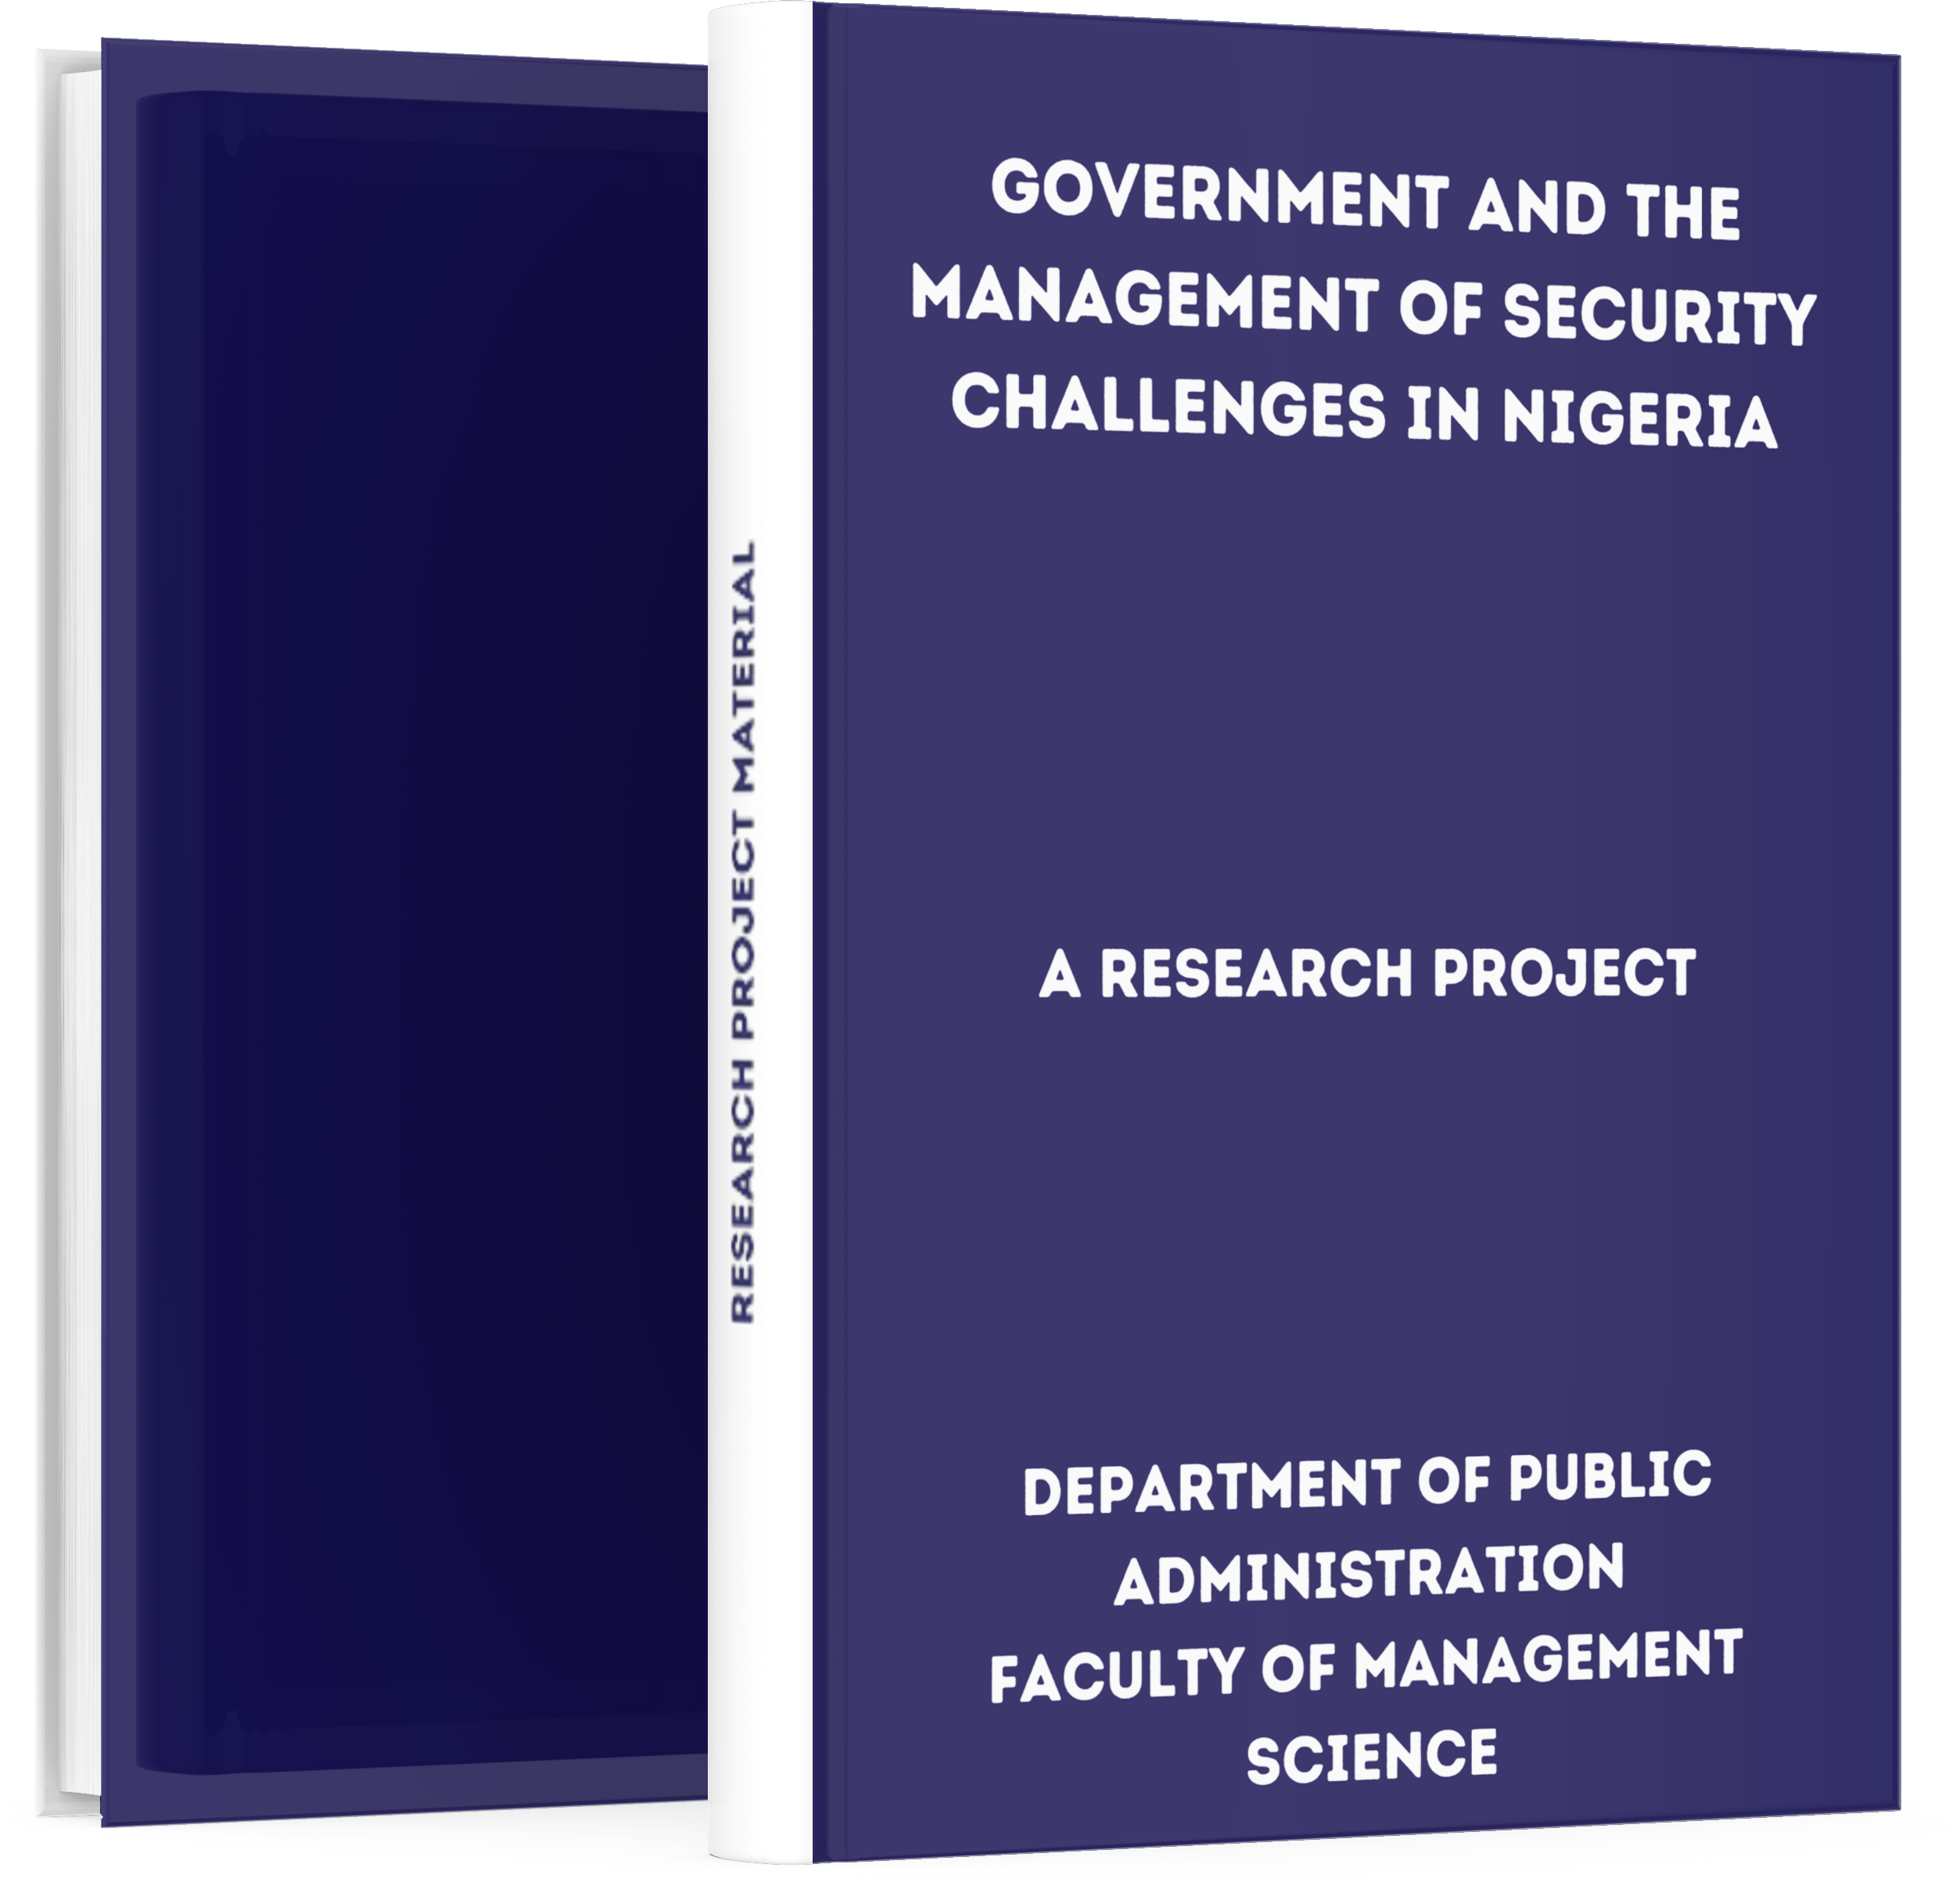 literature review on security challenges in nigeria